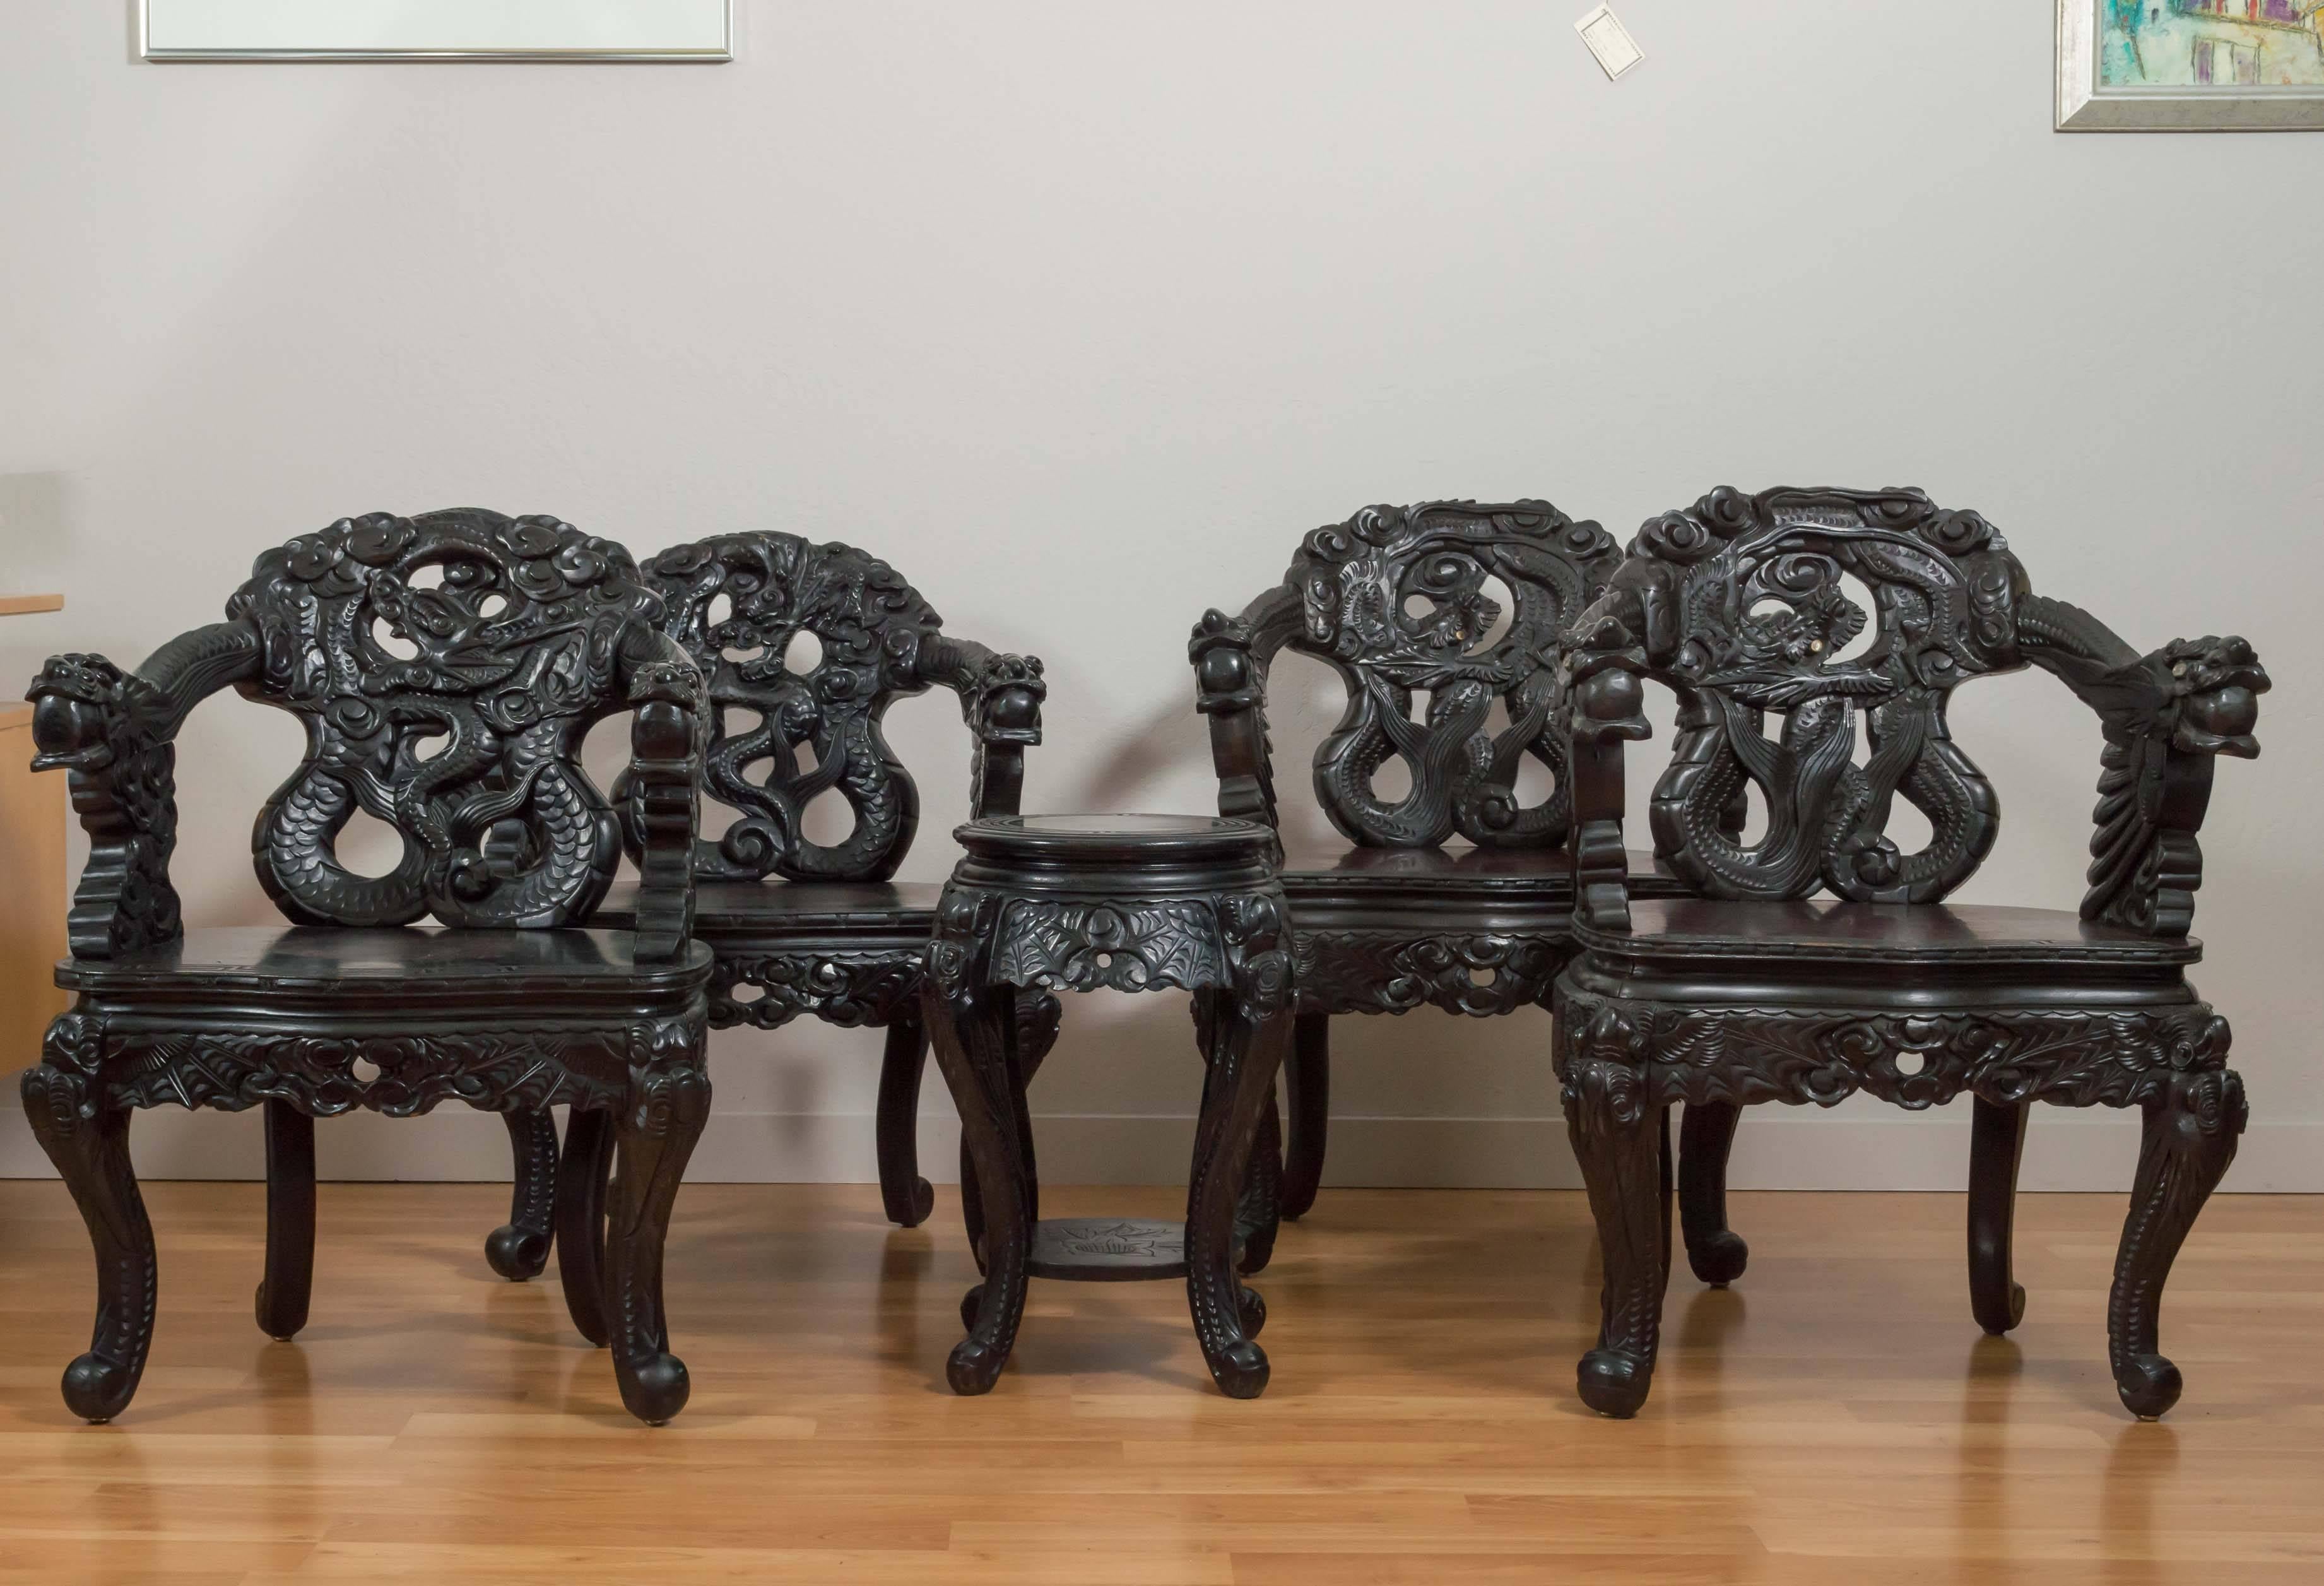 A very expressive pair of ebonized and embellished antique Chinese chairs that feature a fierce, deeply carved dragon motif.

Hand crafted out of a heavy mahogany-type wood, they have an ebonized finish with the exception of ample, dark